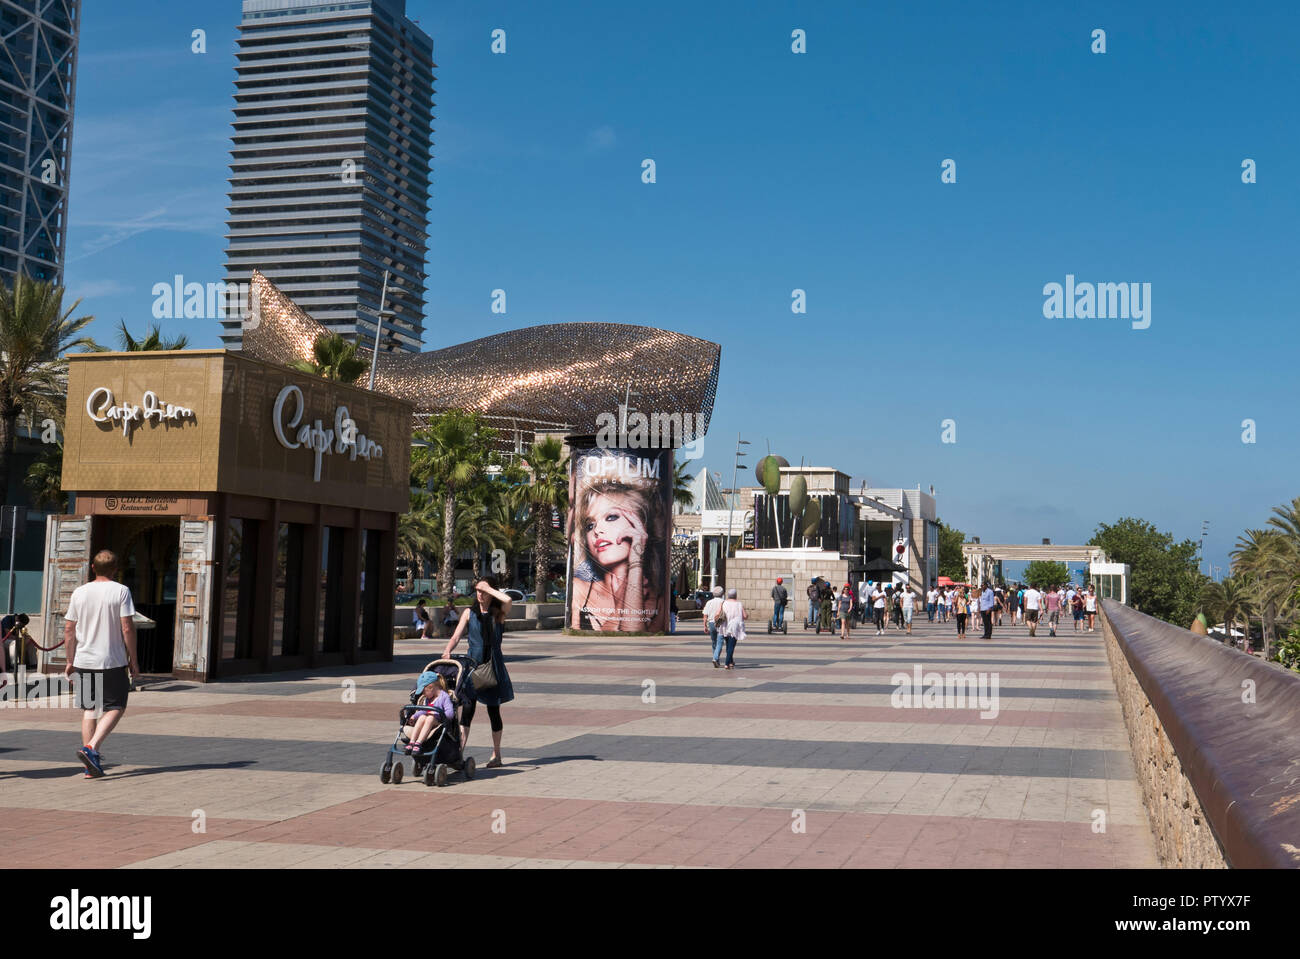 People walking along the promenade by the seafront in Barcelona, Spain Stock Photo